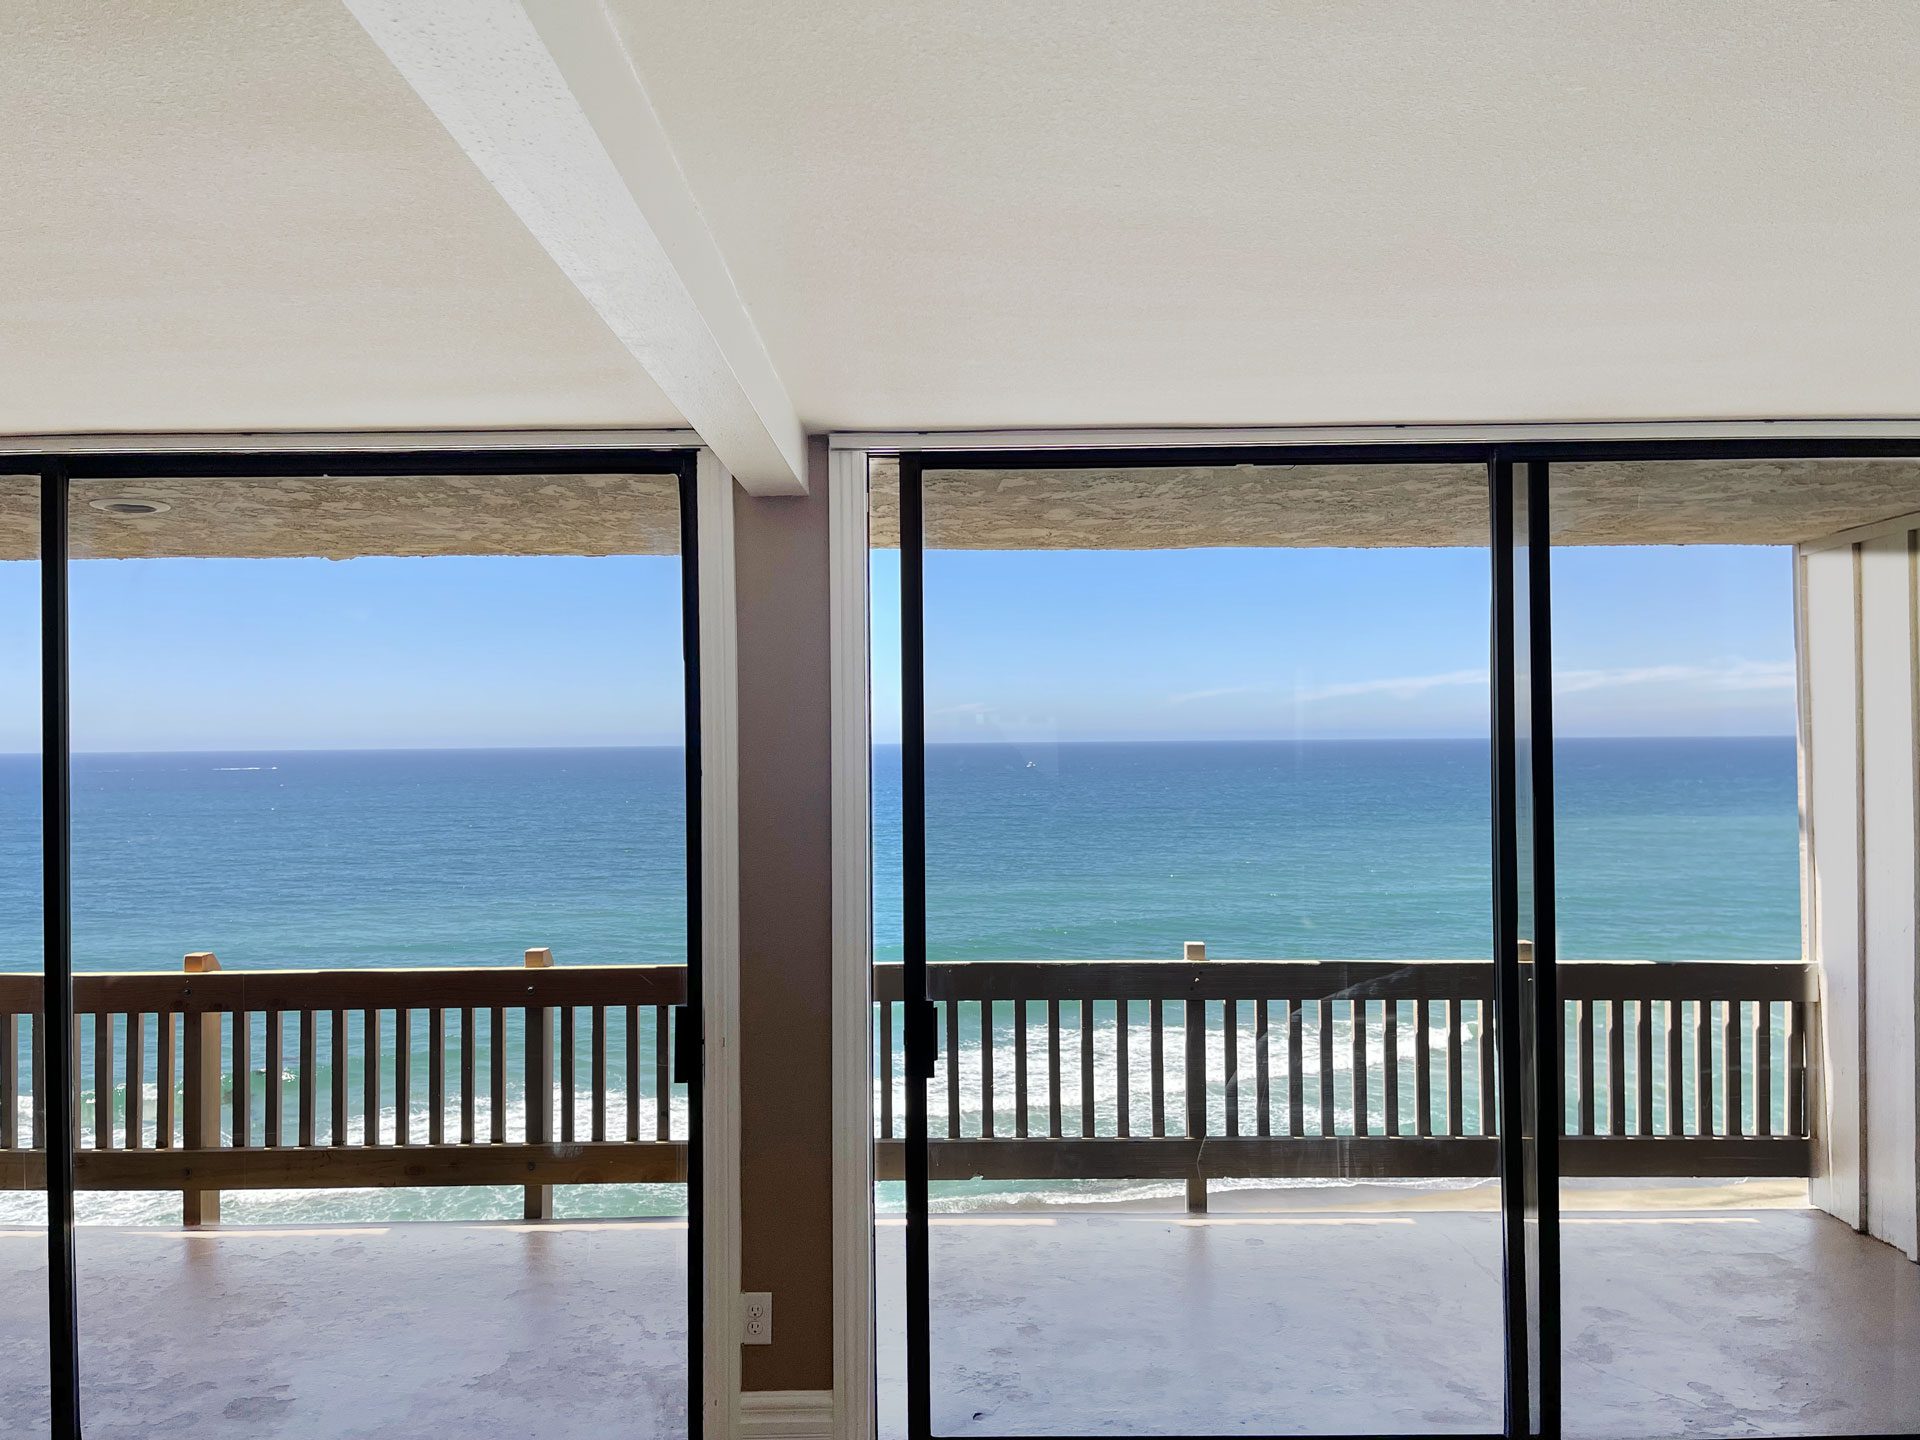 Ocean views from your kitchen